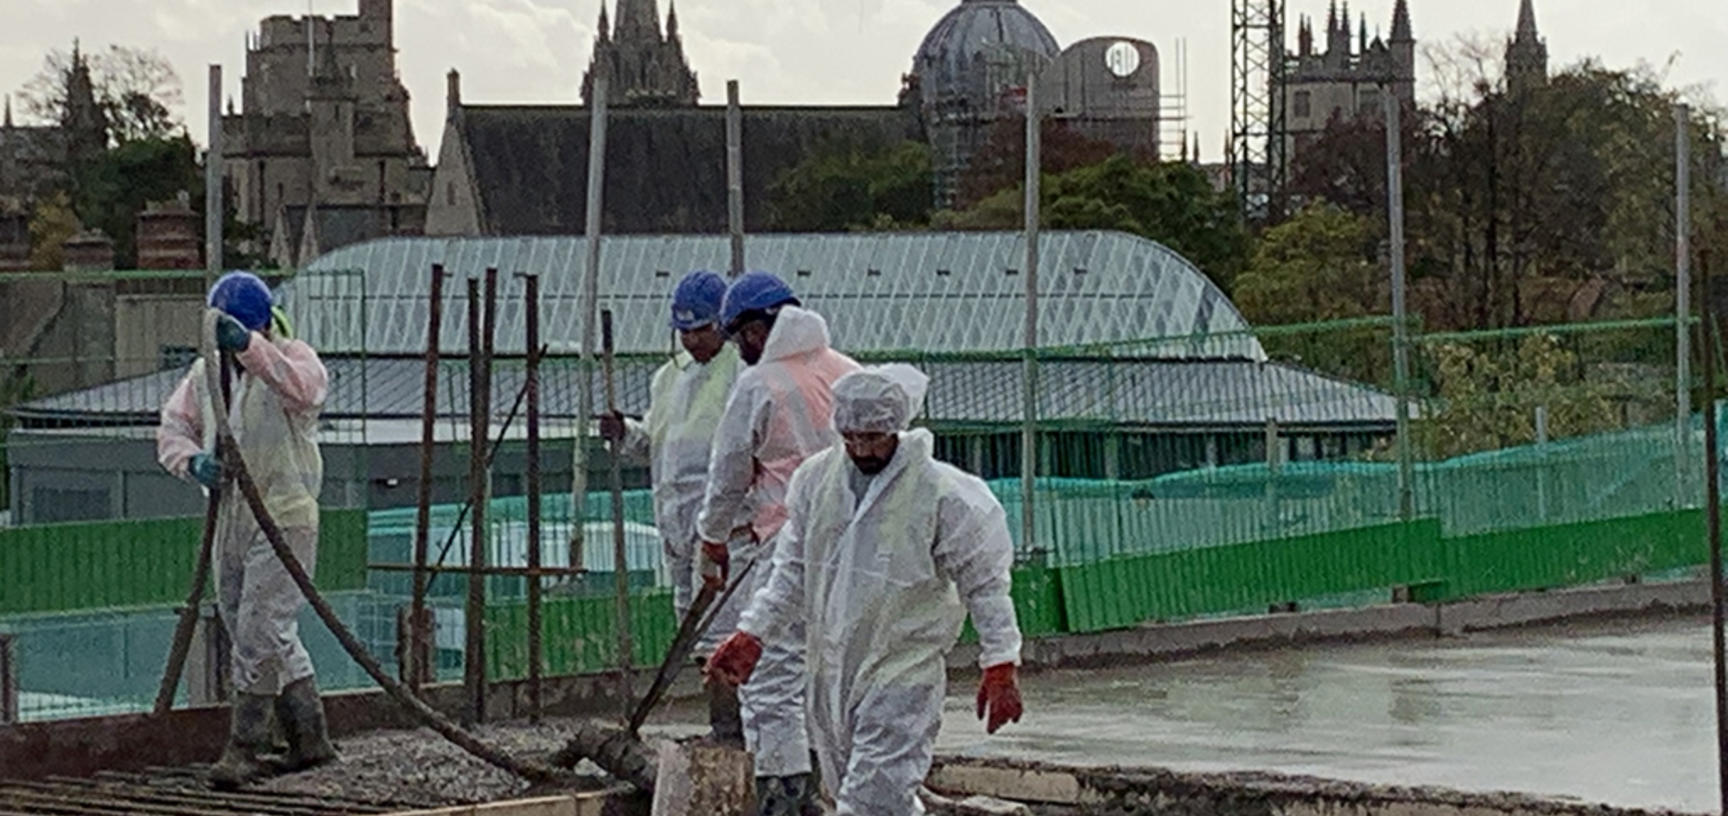 Workers in white protective suits pouring concrete